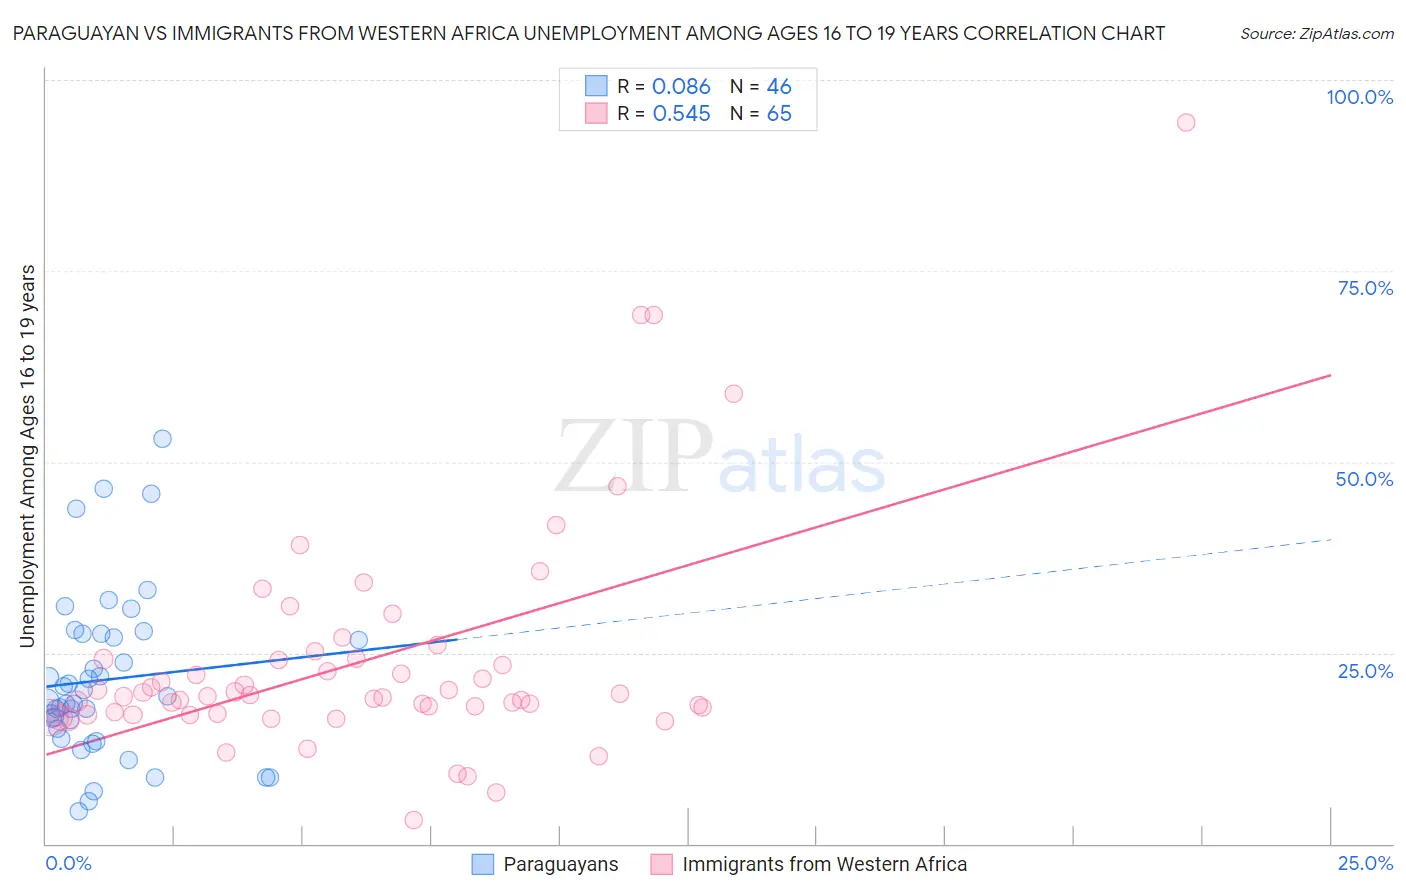 Paraguayan vs Immigrants from Western Africa Unemployment Among Ages 16 to 19 years